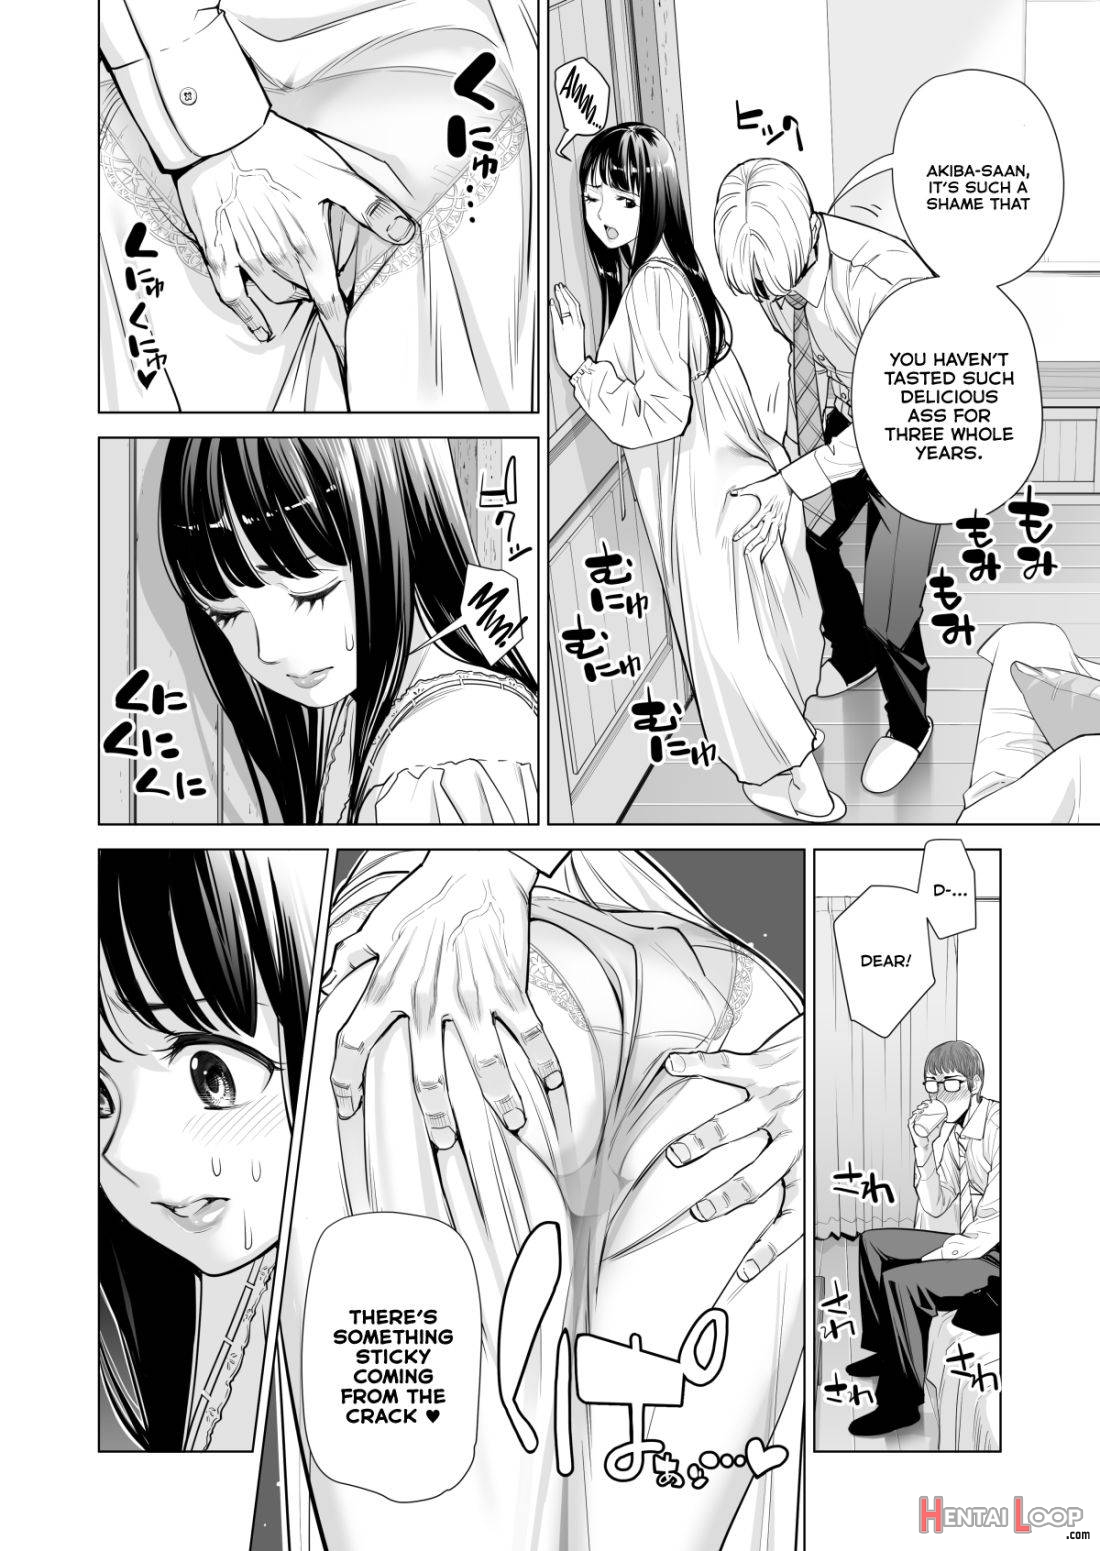 Tsukiyo no Midare Zake (Zenpen) Moonlit Intoxication ~ A Housewife Stolen by a Coworker Besides her Blackout Drunk Husband ~ Chapter 1 page 18